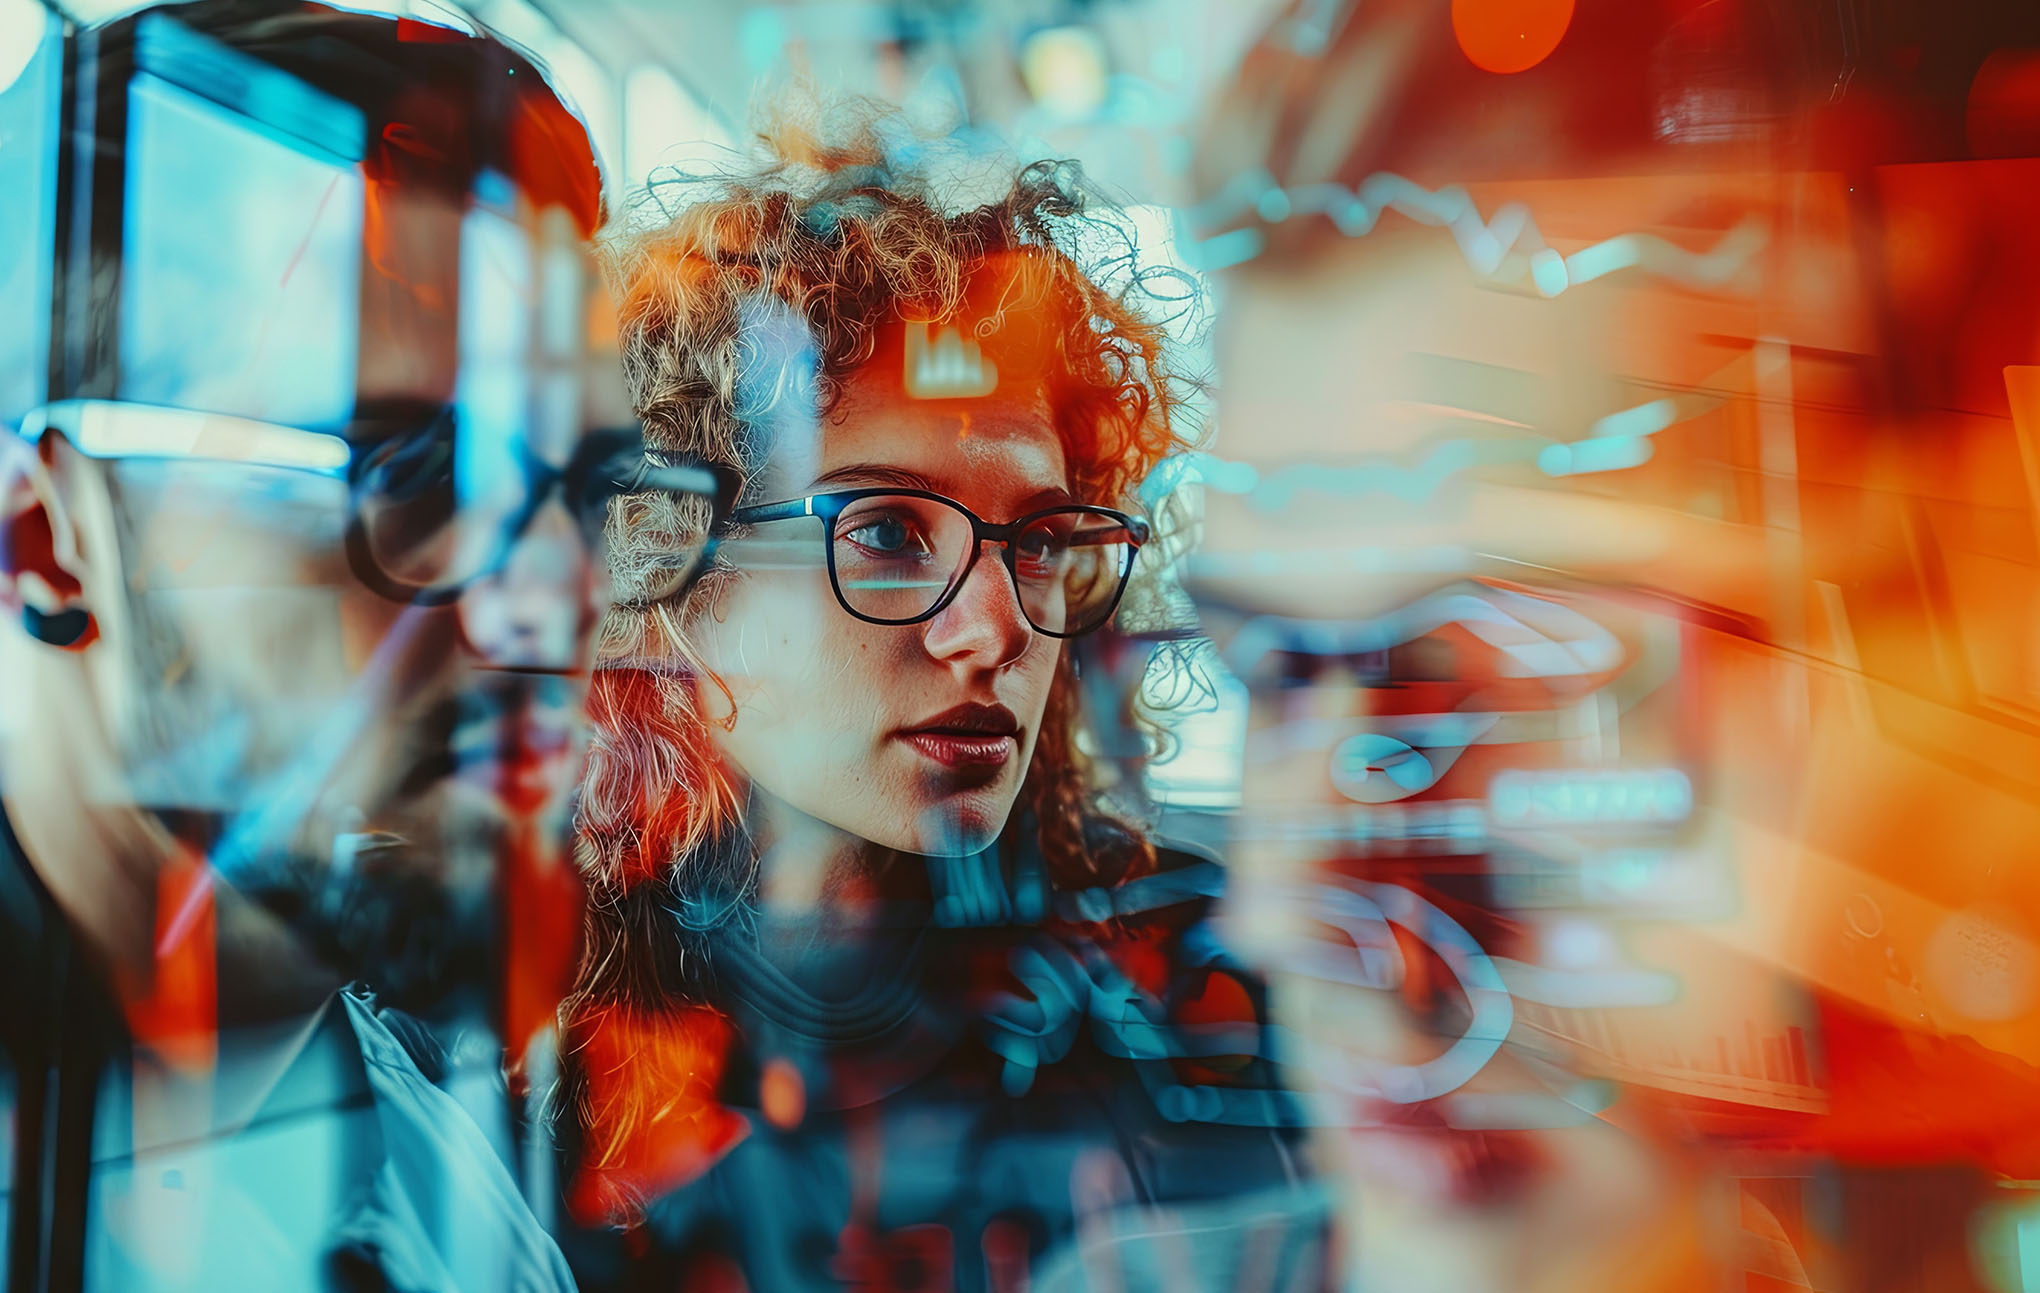 A vivid, abstract image featuring a young woman with curly hair and glasses centered among blurred figures and digital overlays in blue and red tones, conveying a dynamic, data-driven design atmosphere.